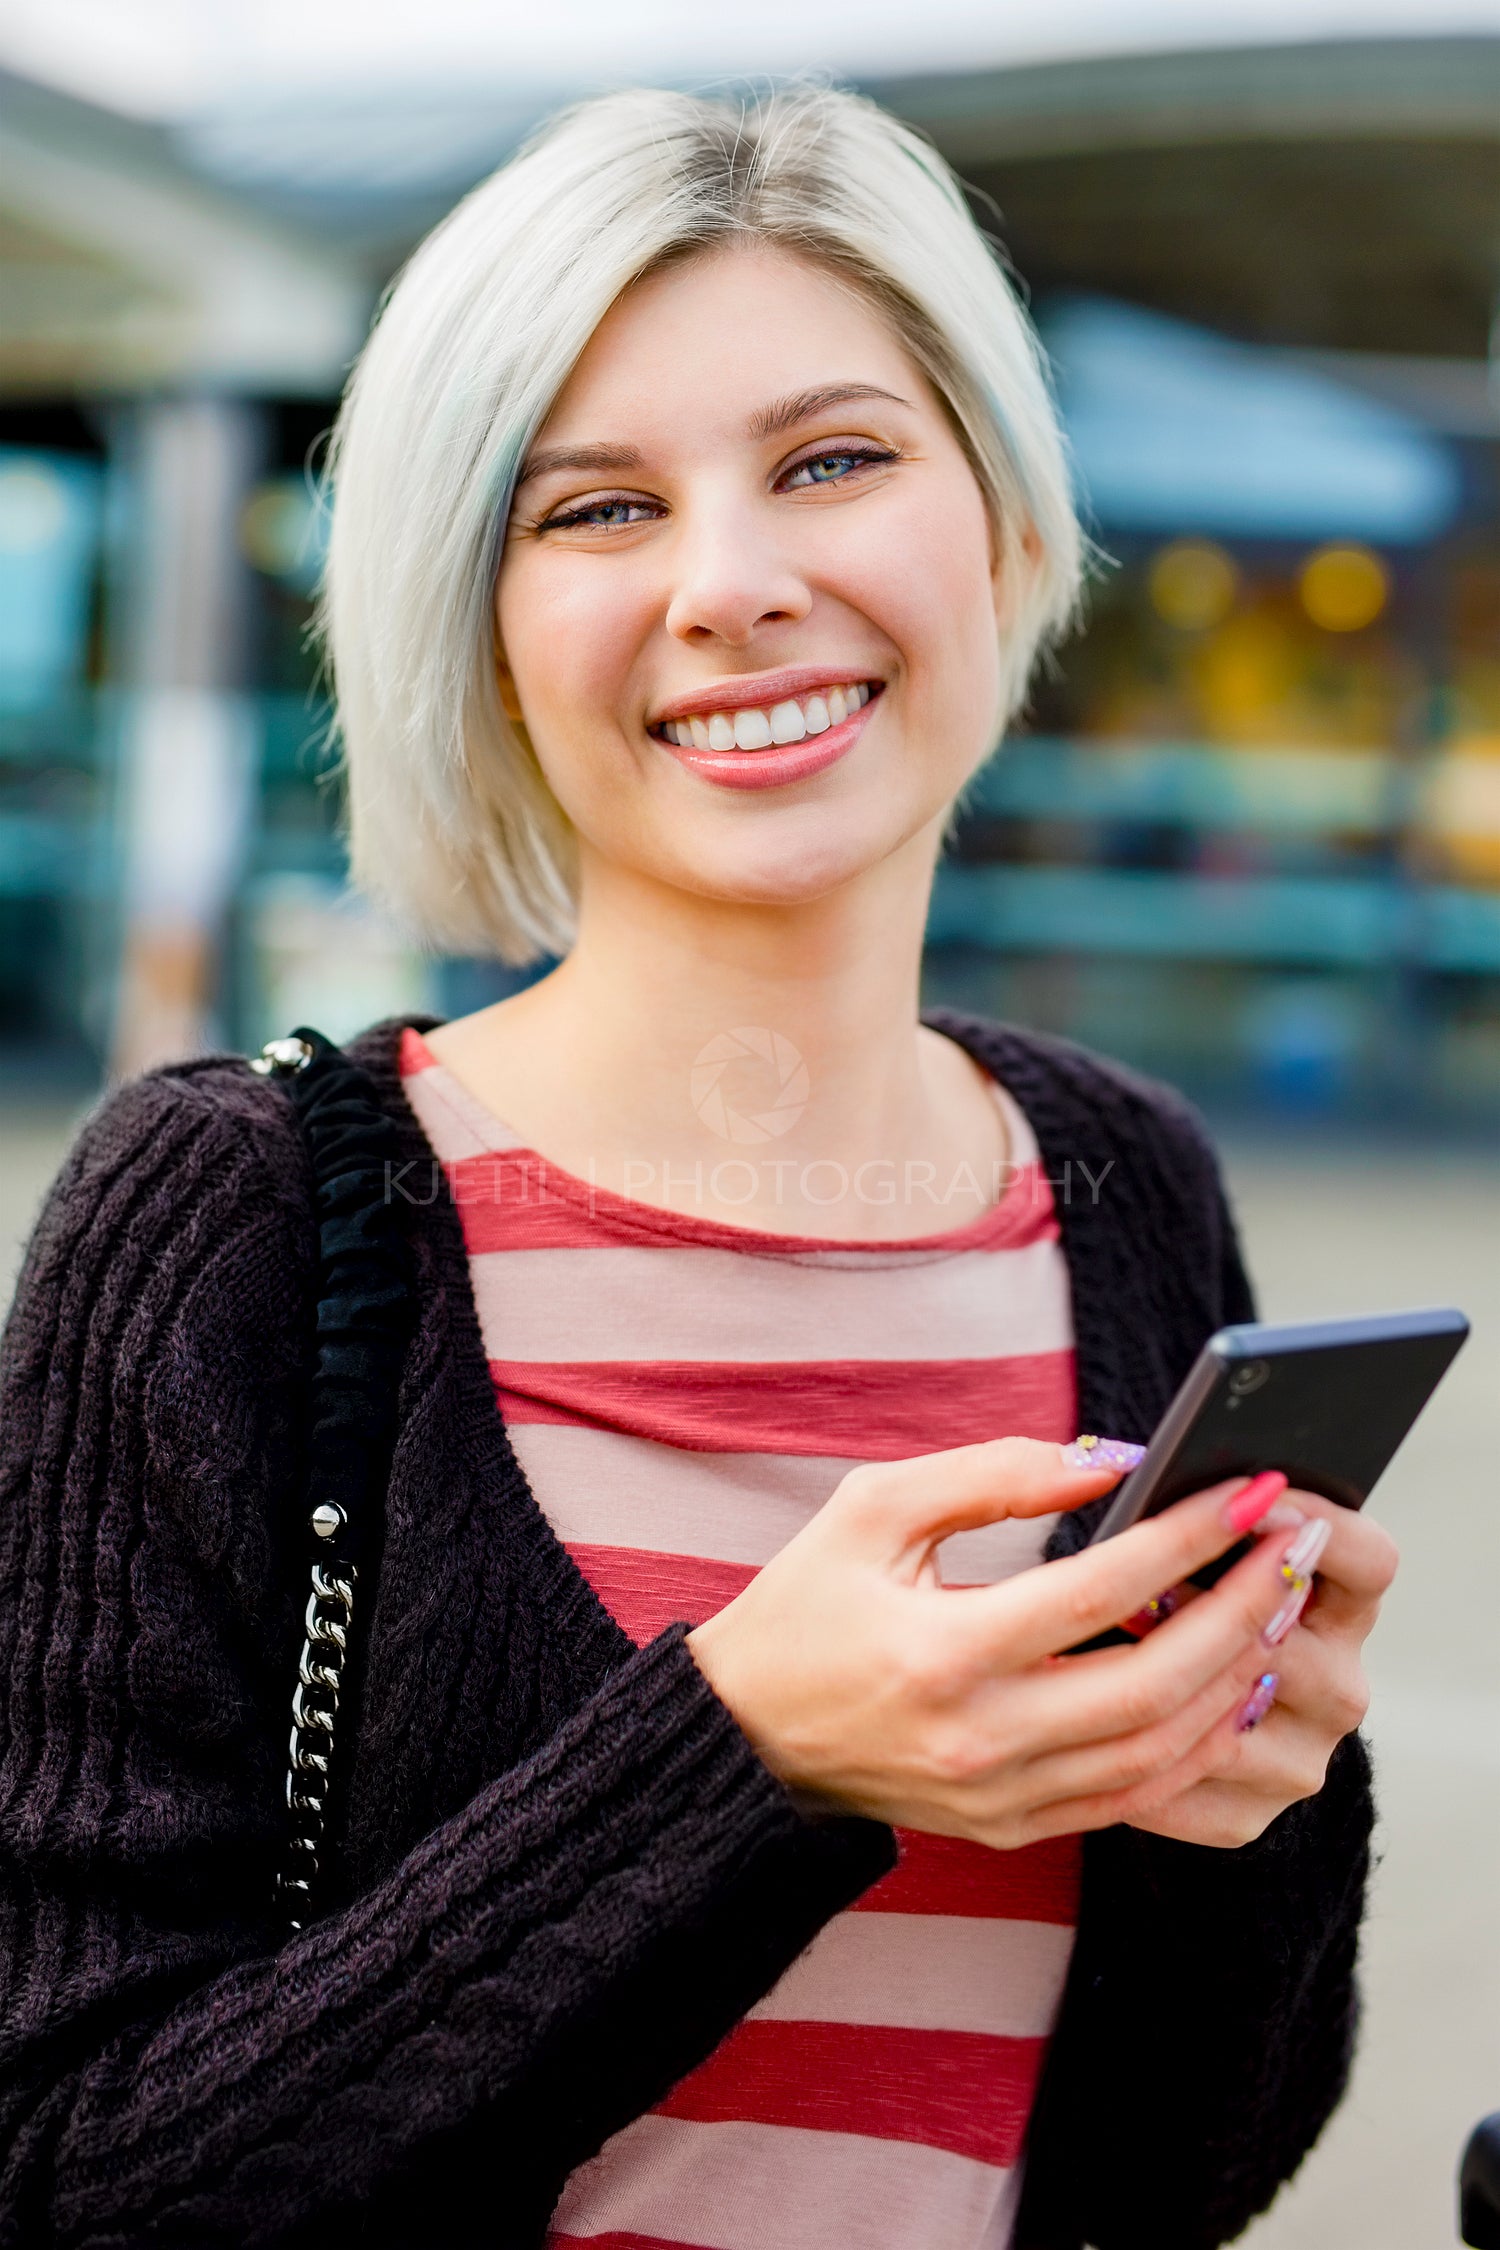 Woman Smiling While Using Smart Phone Outside Train Station